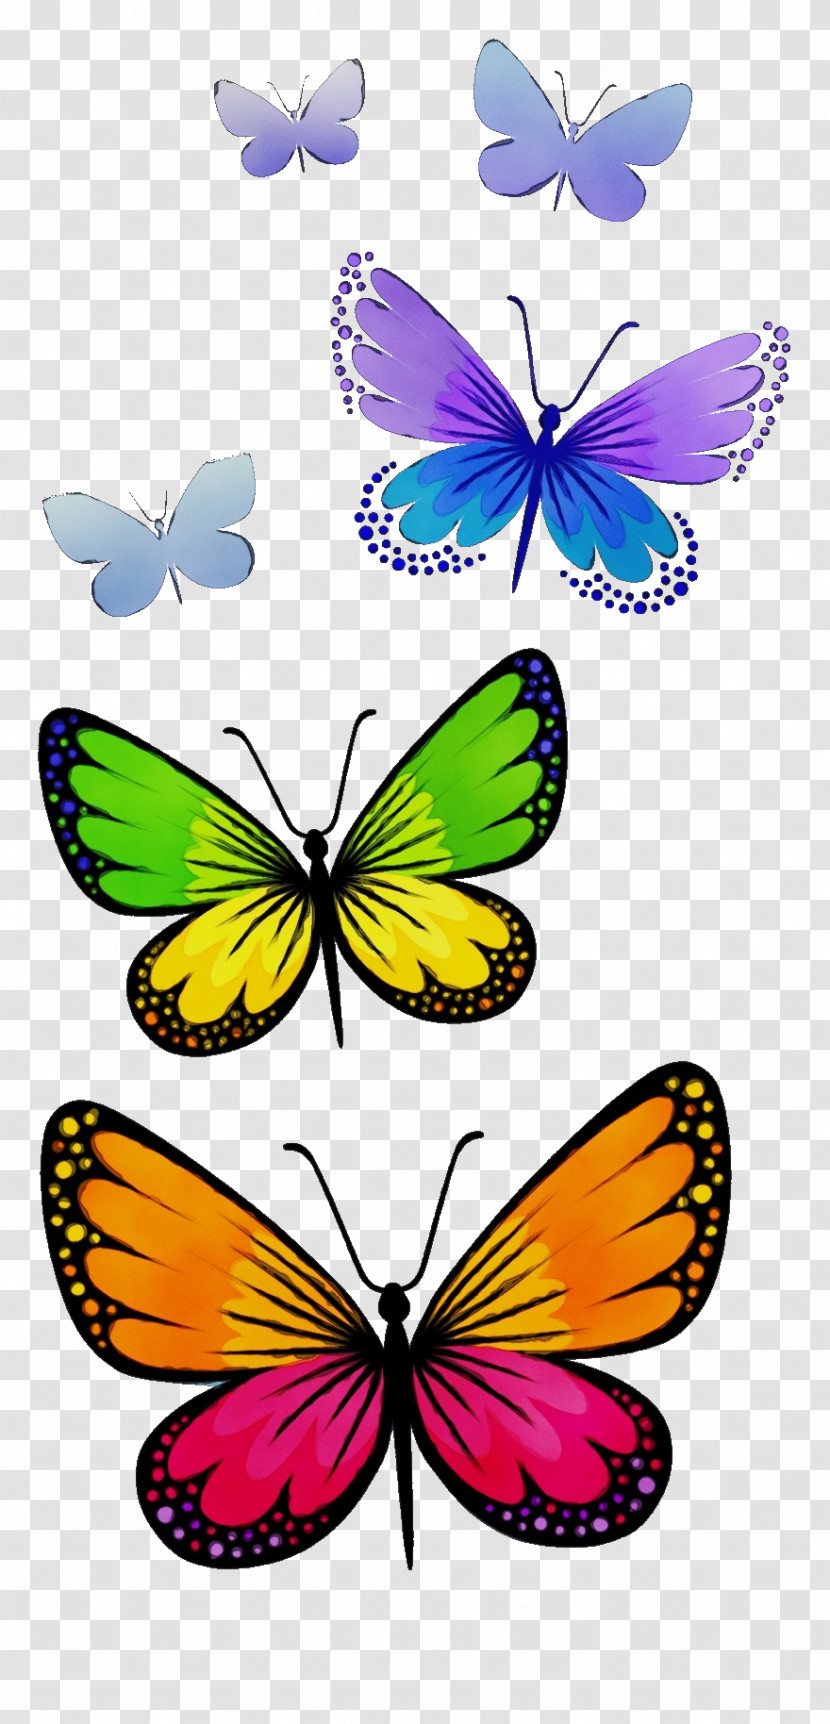 Moths And Butterflies Butterfly Insect Pollinator Wing Transparent PNG